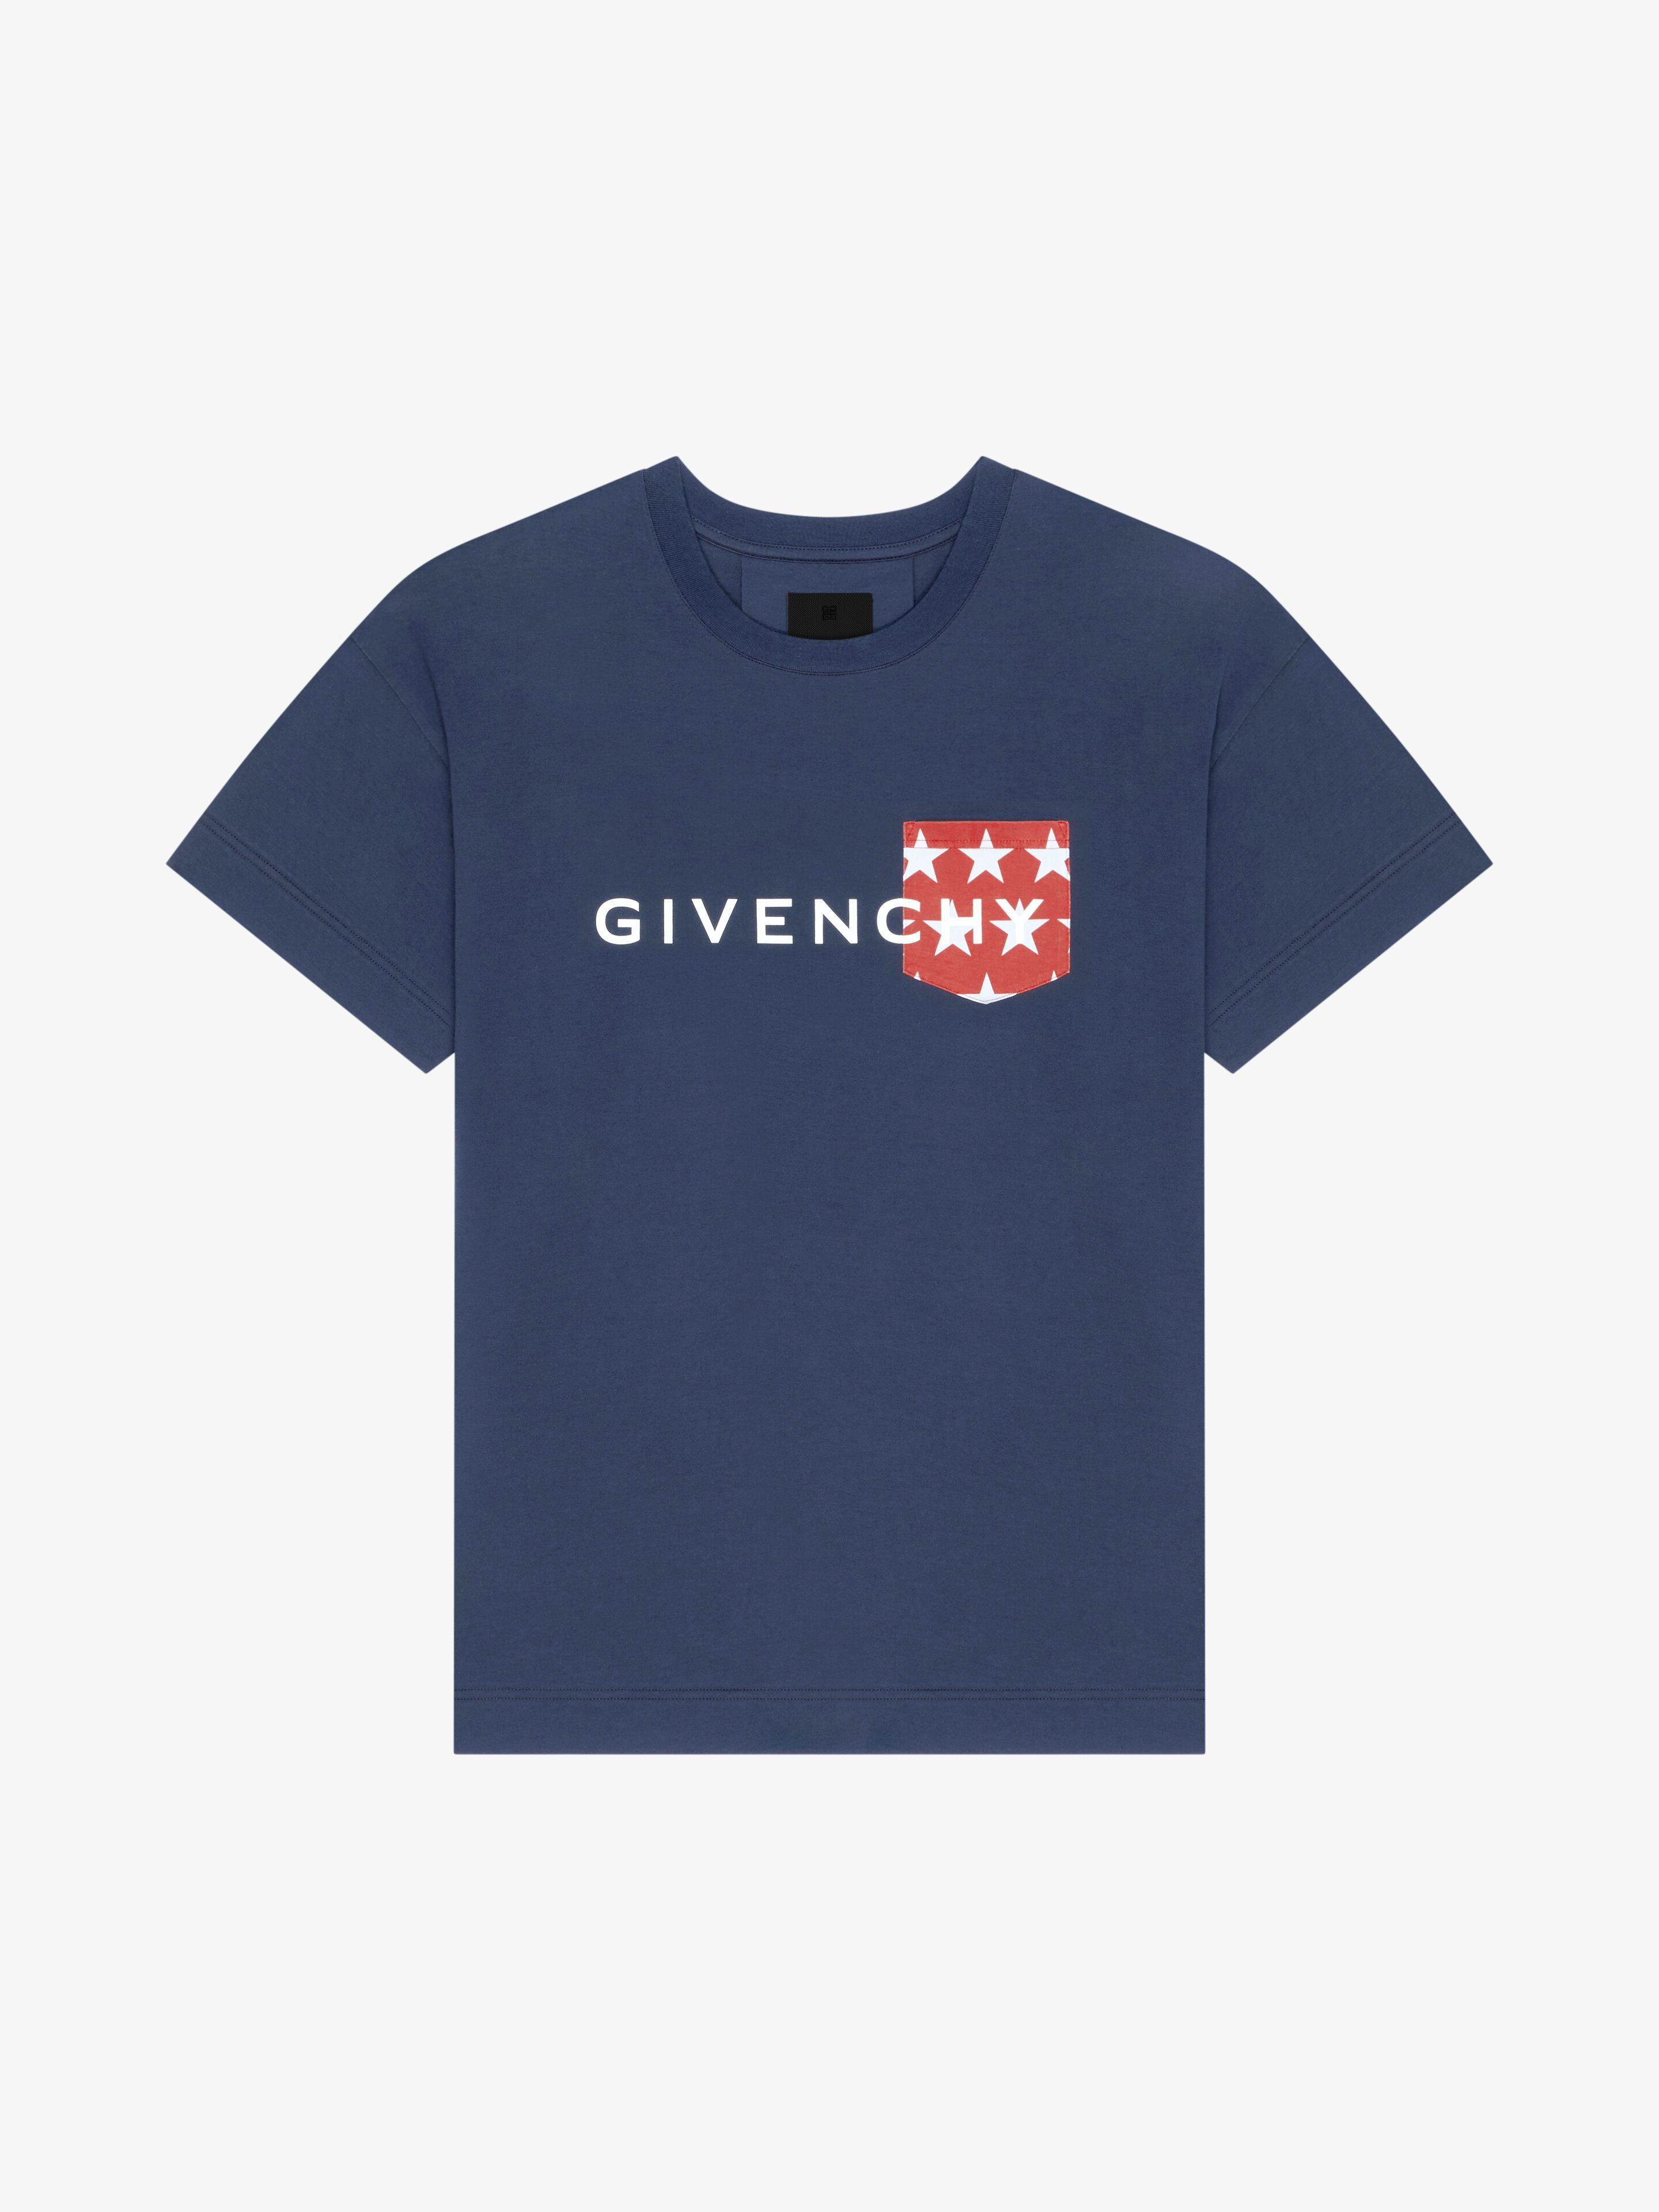 GIVENCHY t-shirt in cotton with pocket